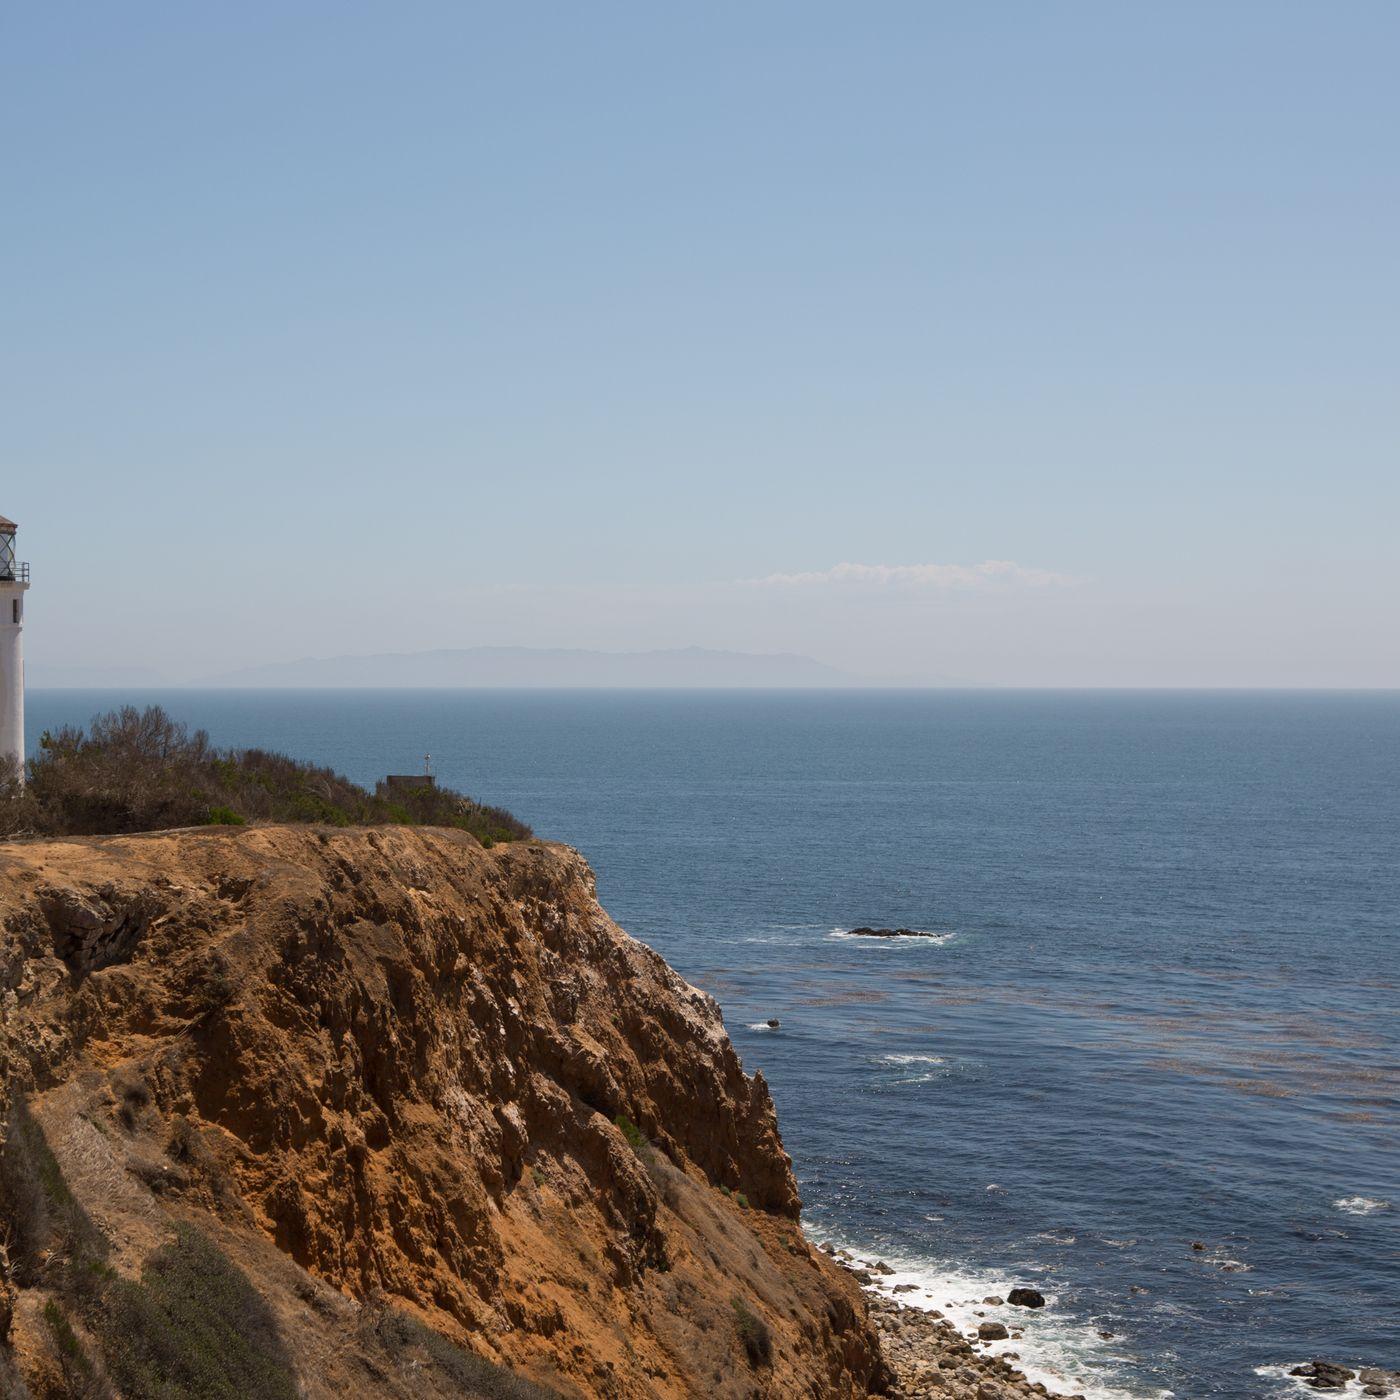 The lighthouse keepers of Los Angeles